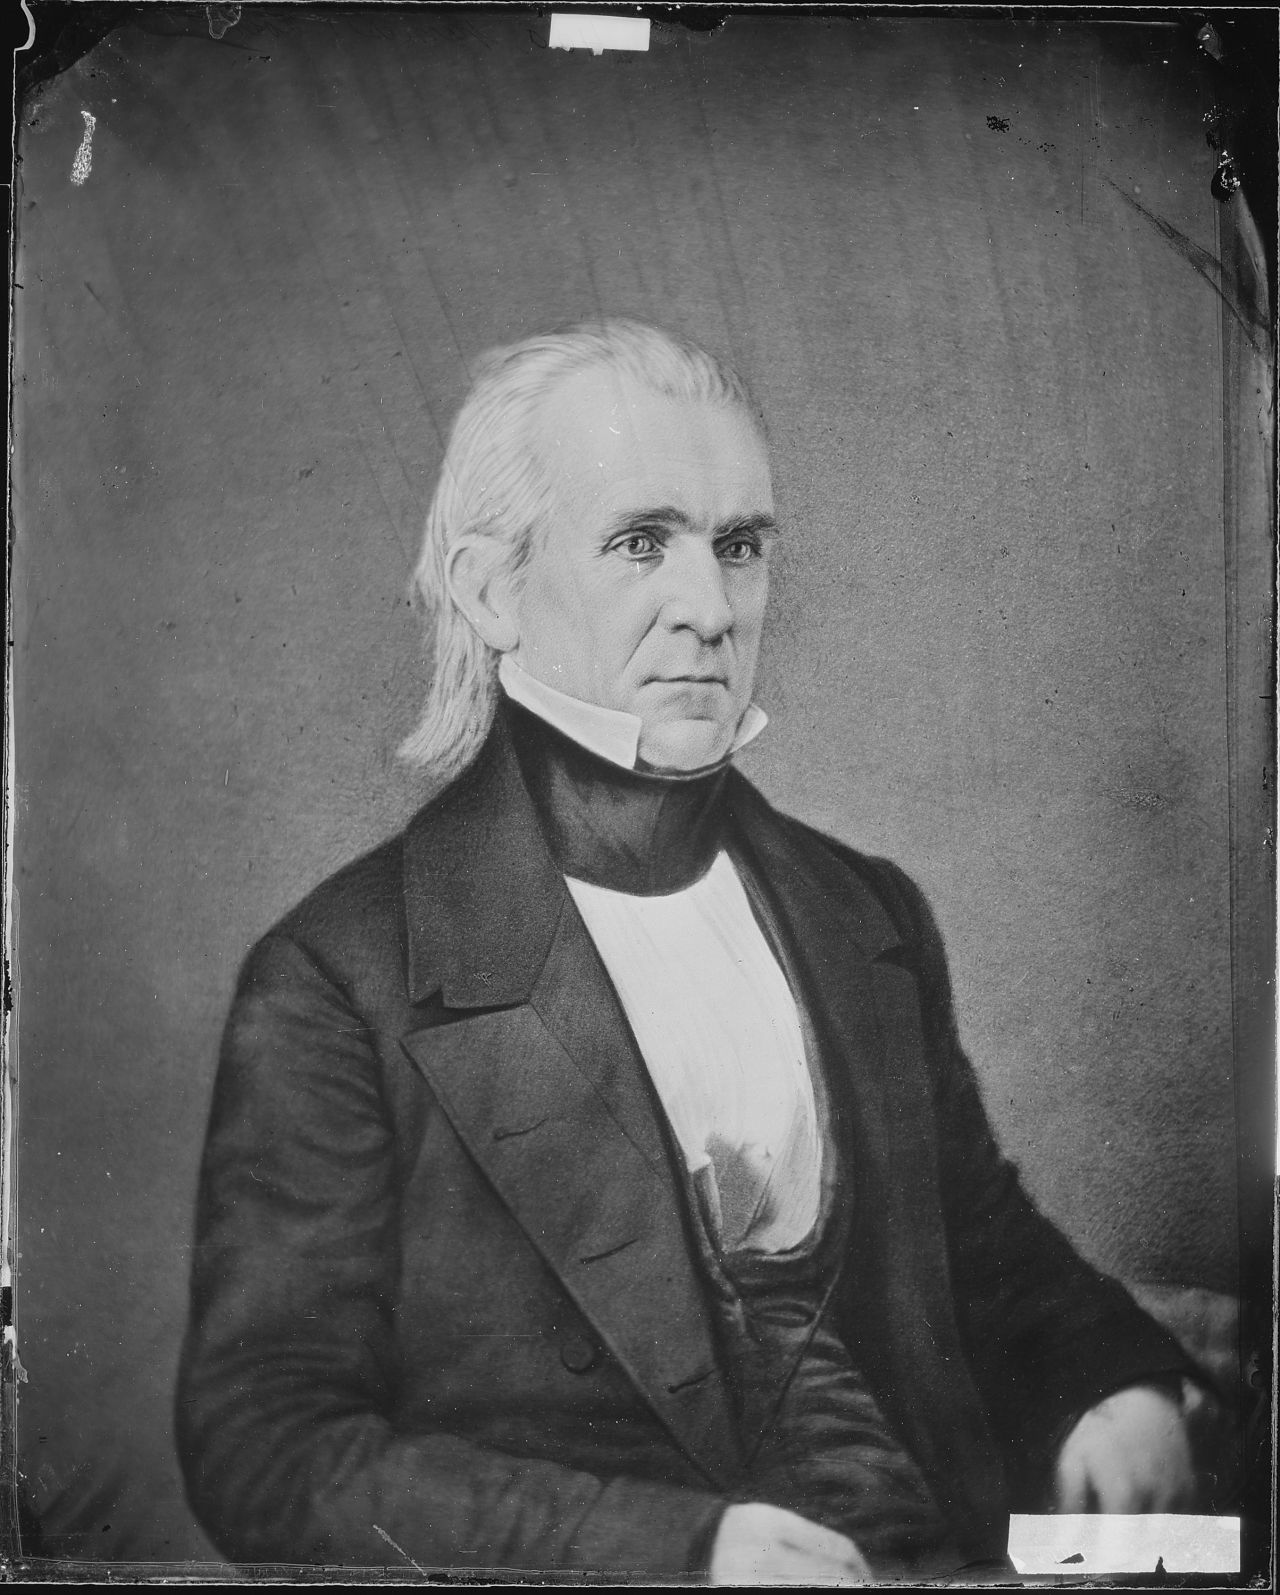 "54-40 or Fight" was James K. Polk's slogan in 1844 — a reference to the territory expansion the U.S. hoped to make. The northern border of the Oregon was located at the 54 degrees, 40 minutes line of latitude.